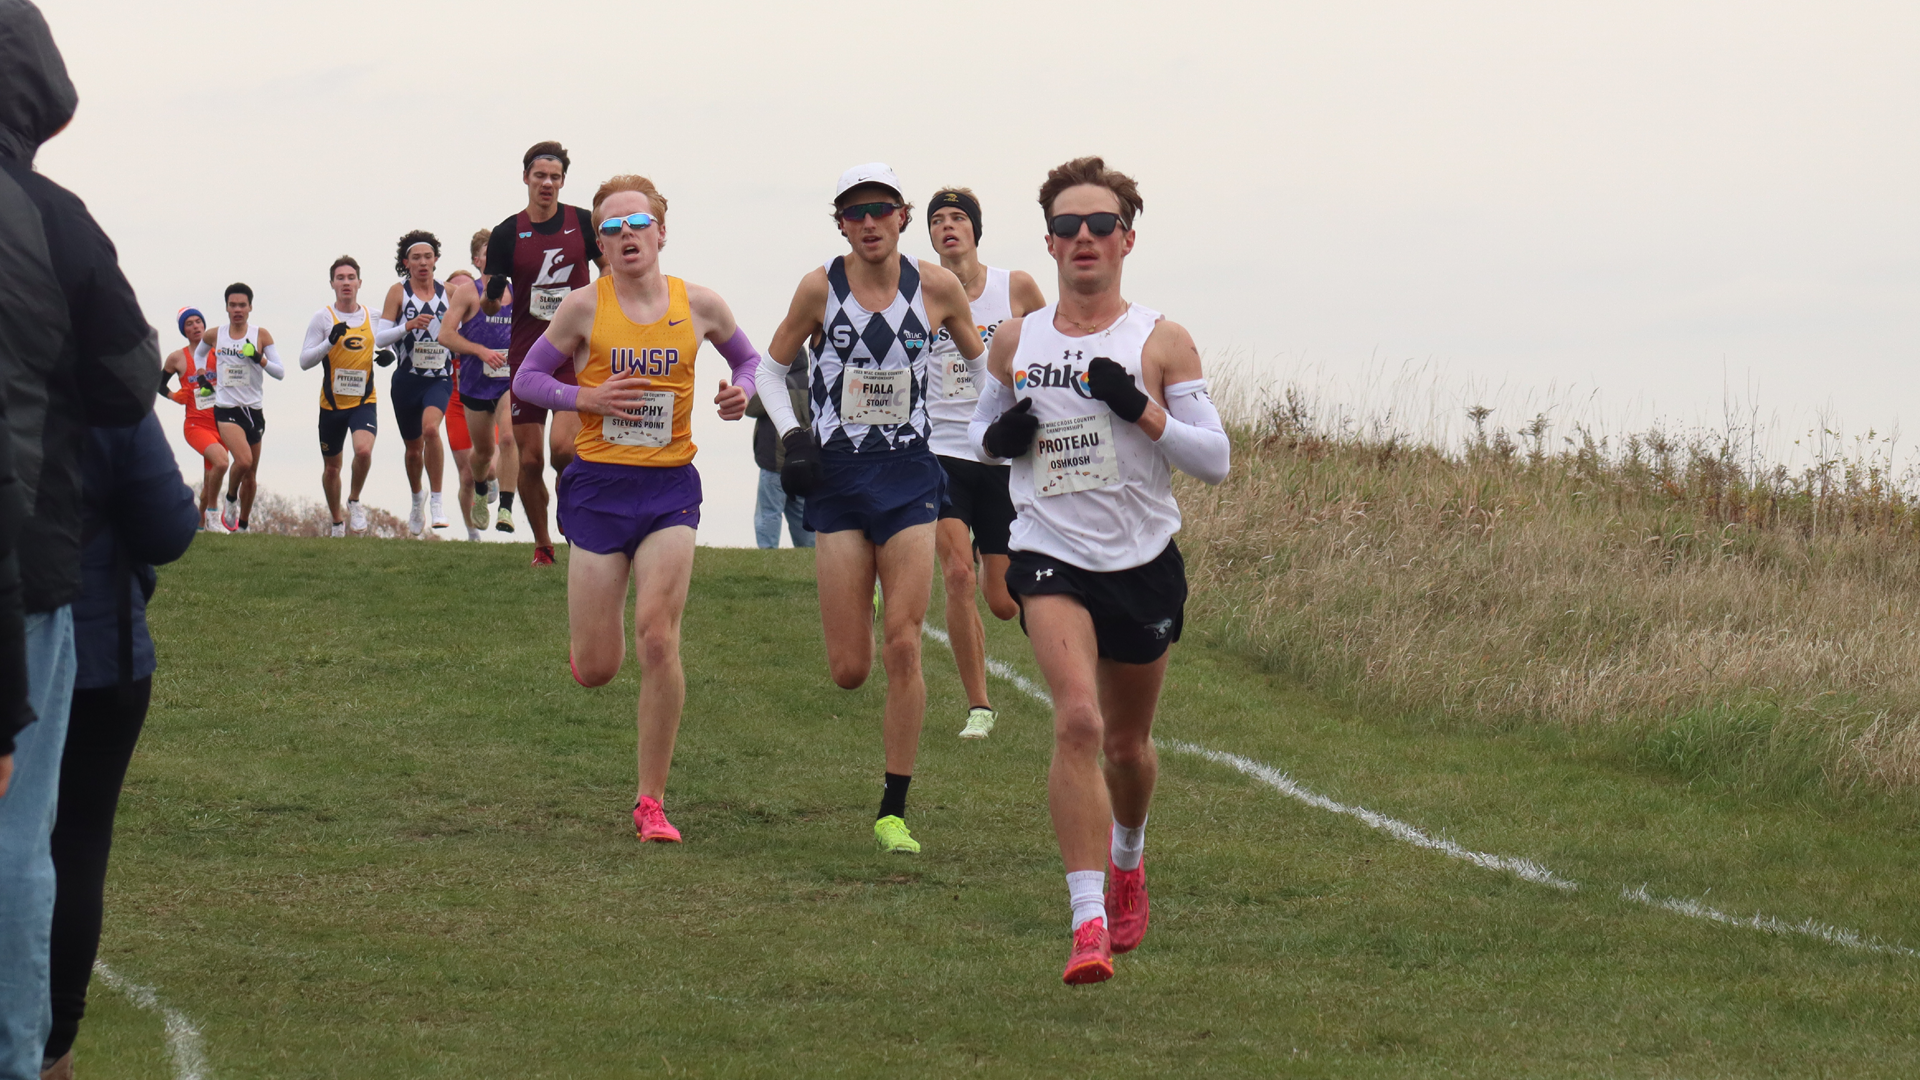 Paul Proteau led the Titans with a 25:35 finish for 21st place